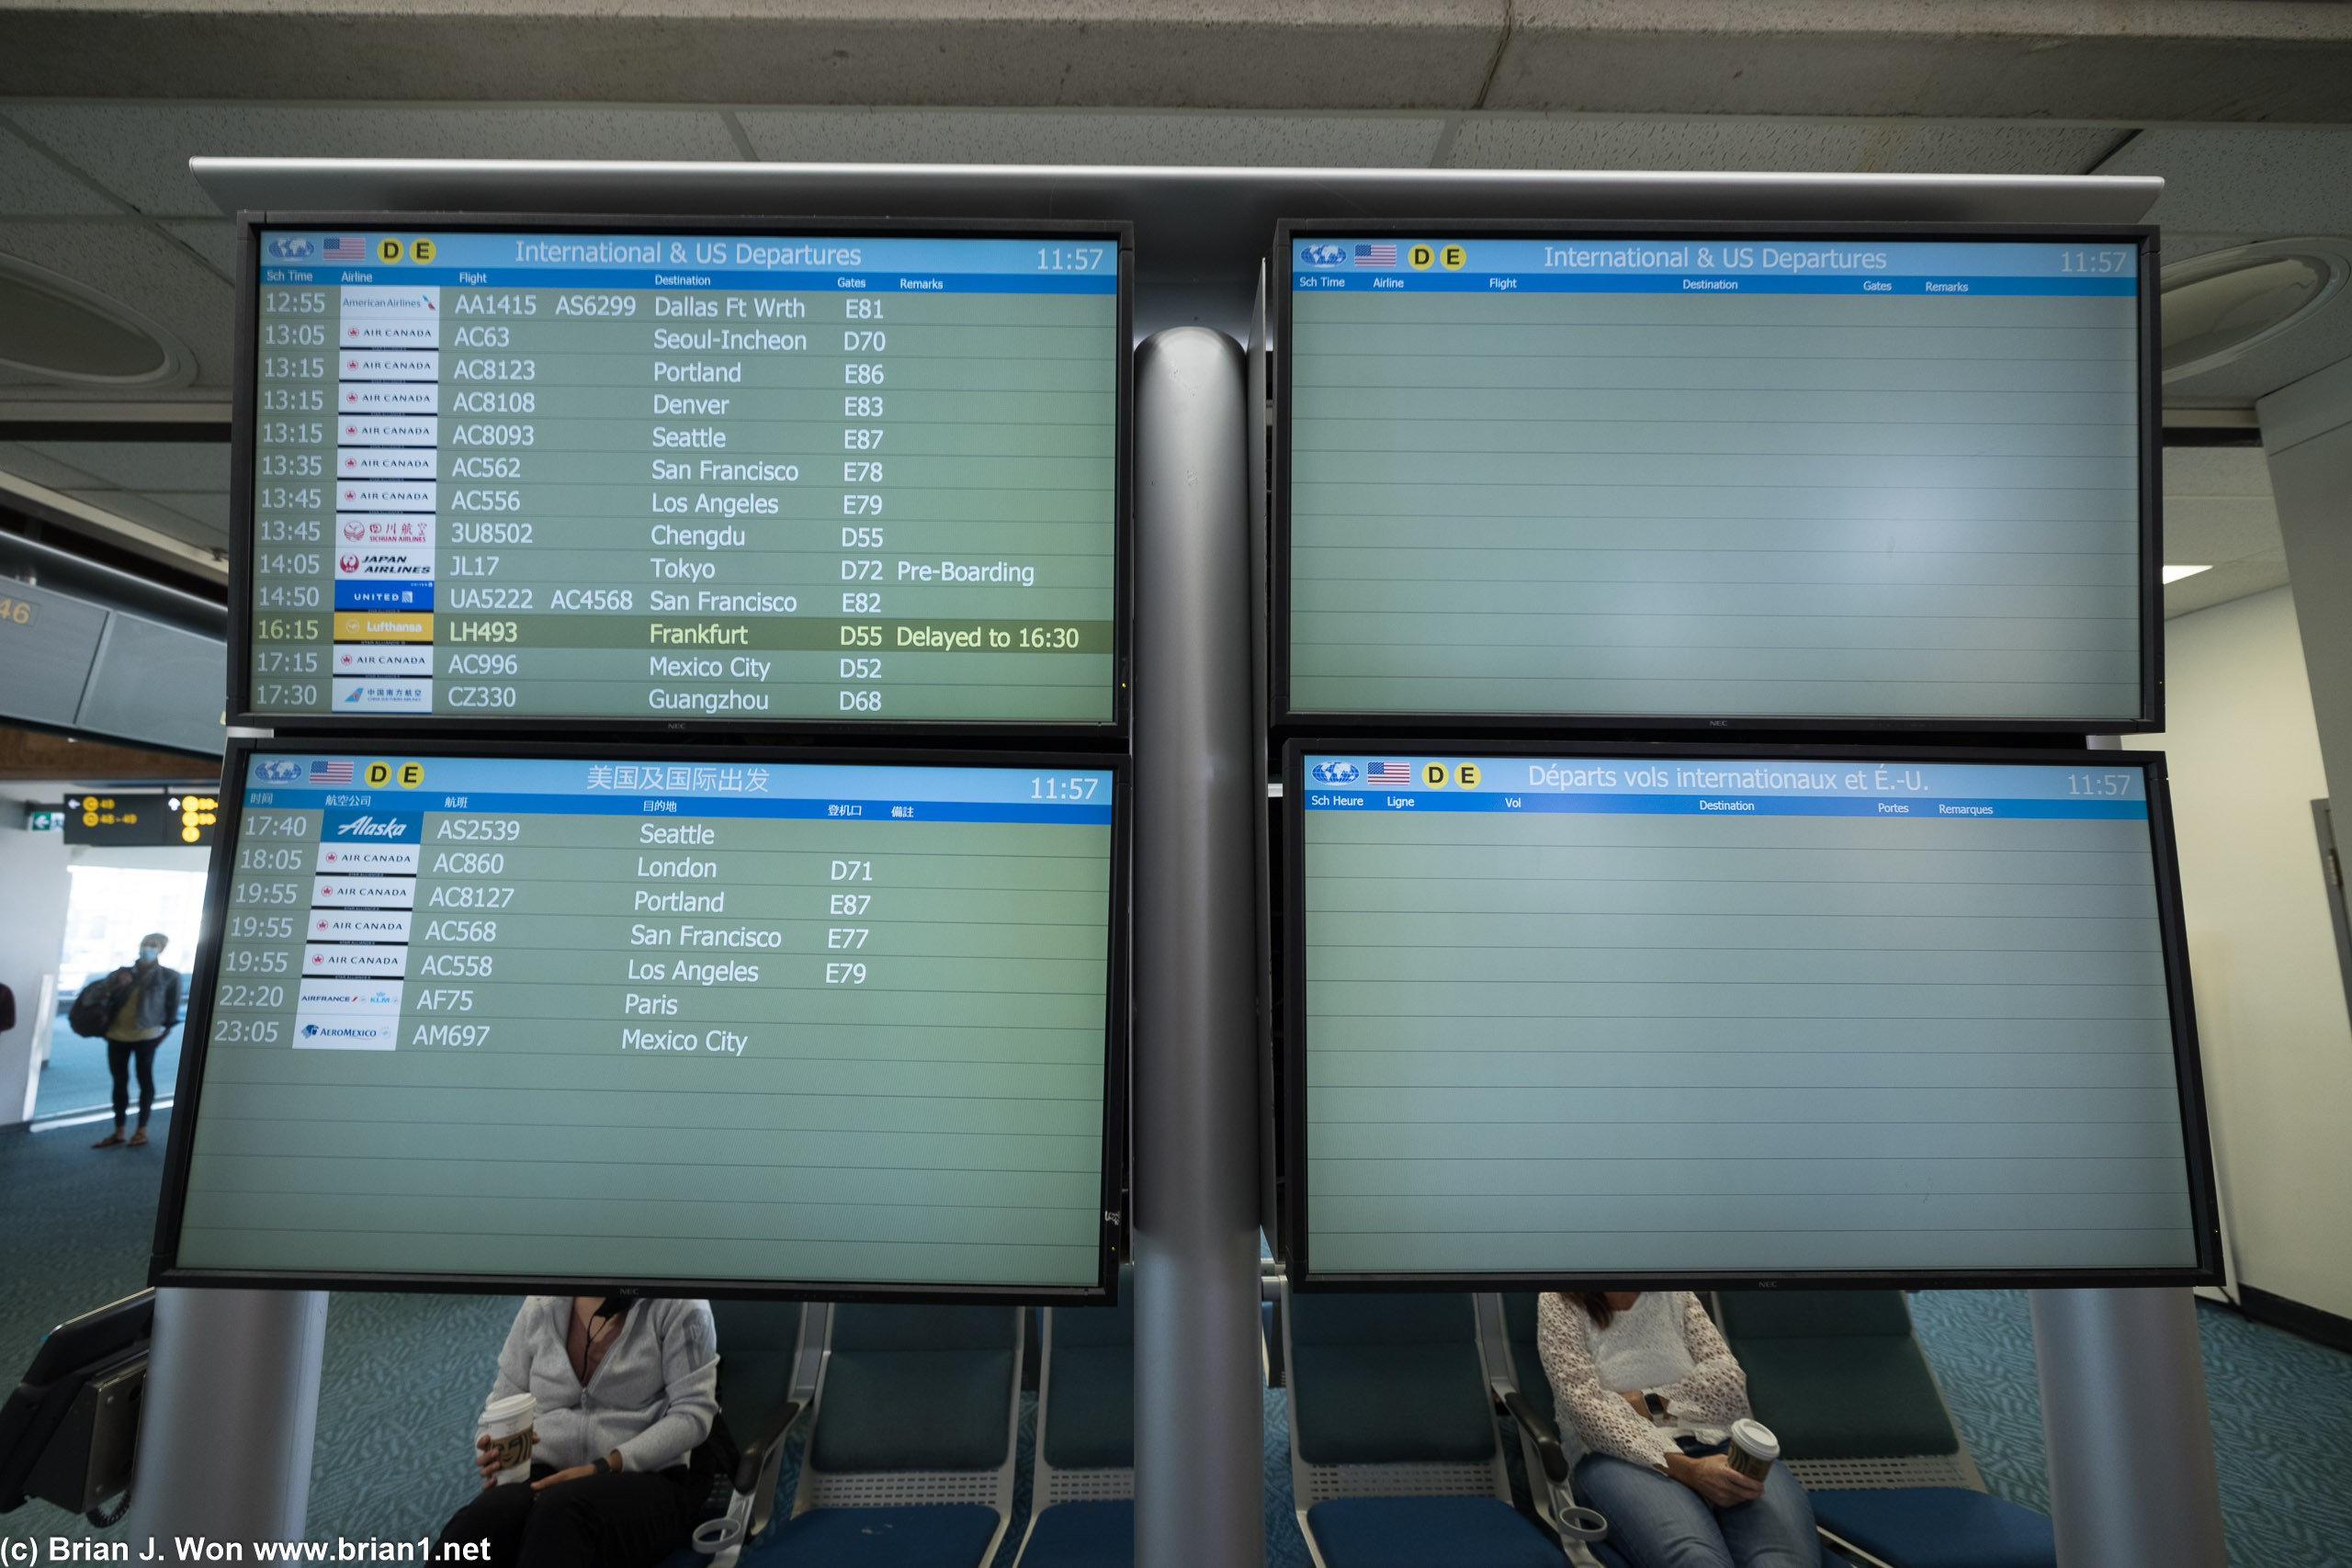 International and US departures board is very sad.